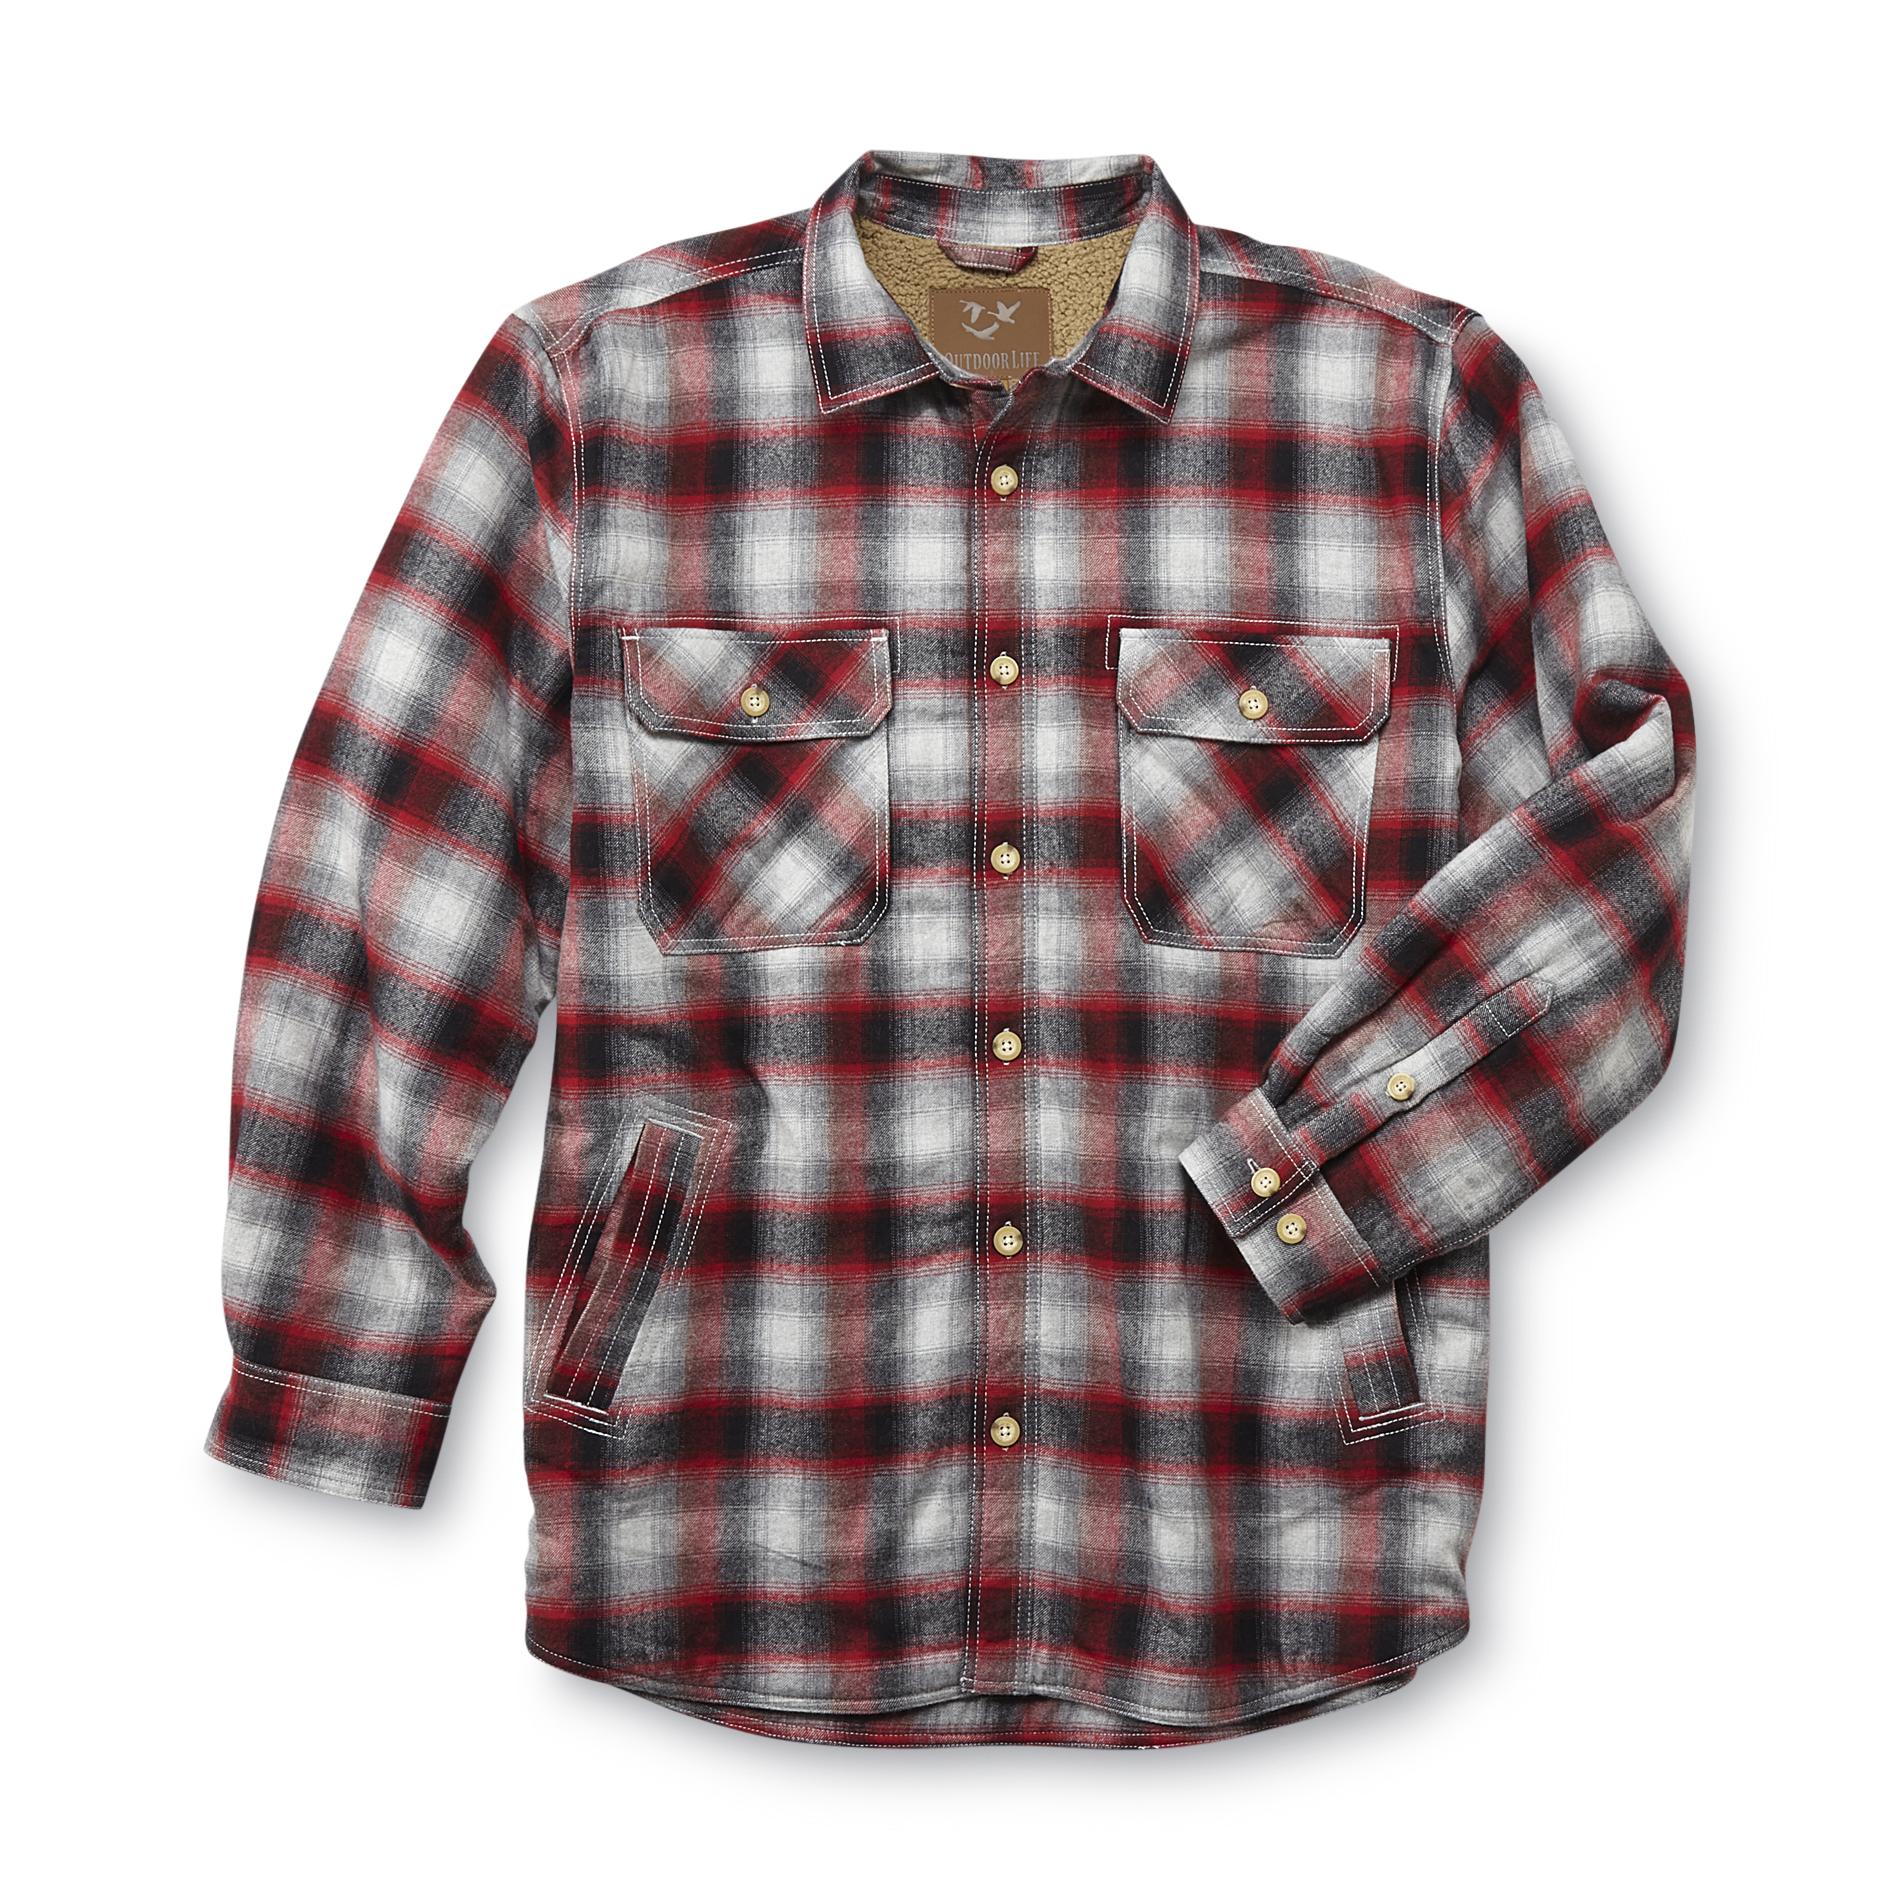 Outdoor Life Men's Big & Tall Sherpa-Lined Flannel Shirt Jacket - Plaid